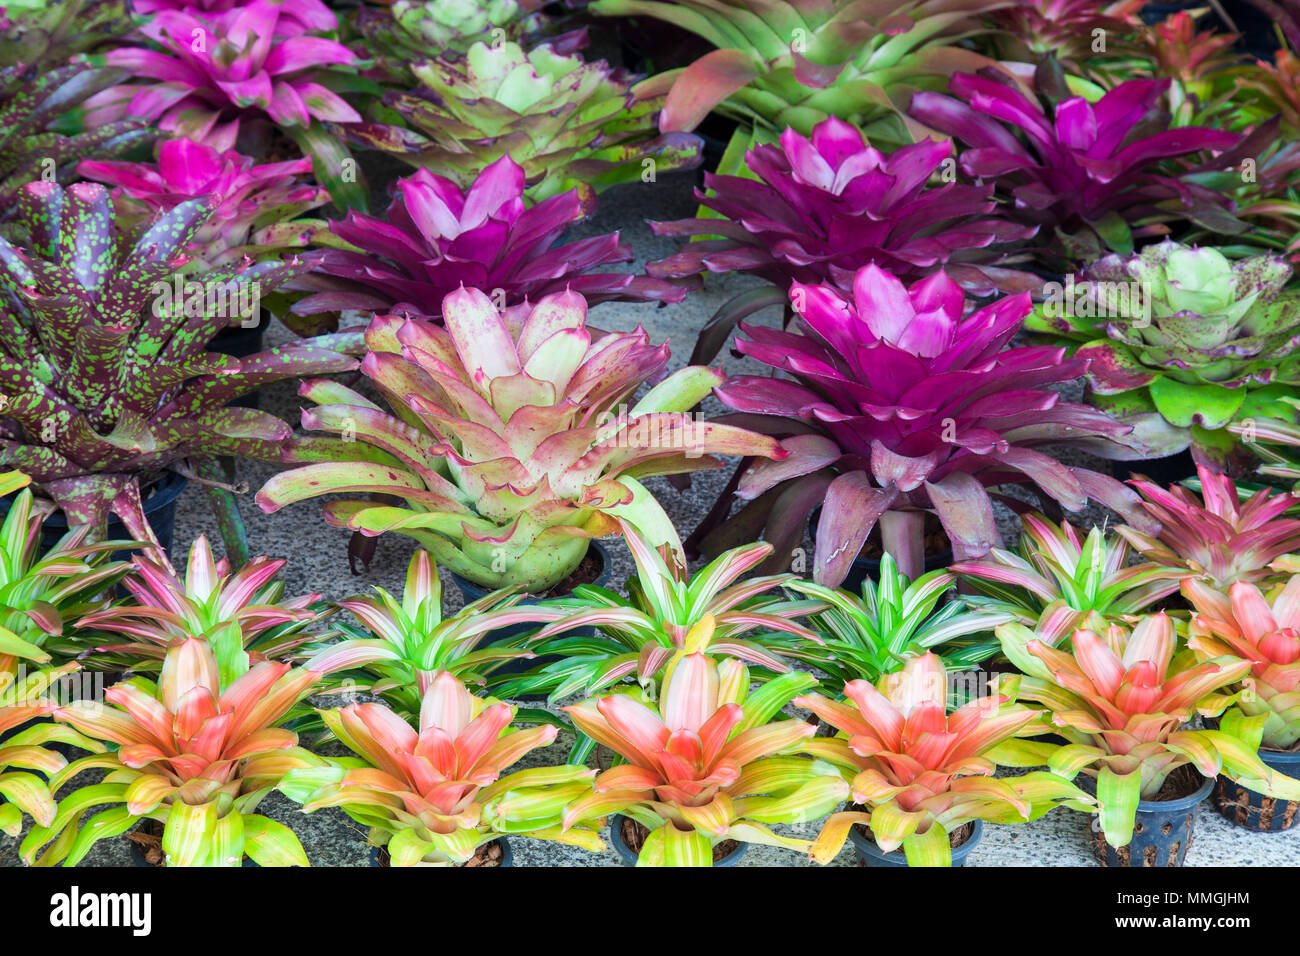 Bromeliad flower in the garden with nature,Bromeliad flower in various color in garden for postcard beauty decoration and agriculture concept design. Stock Photo